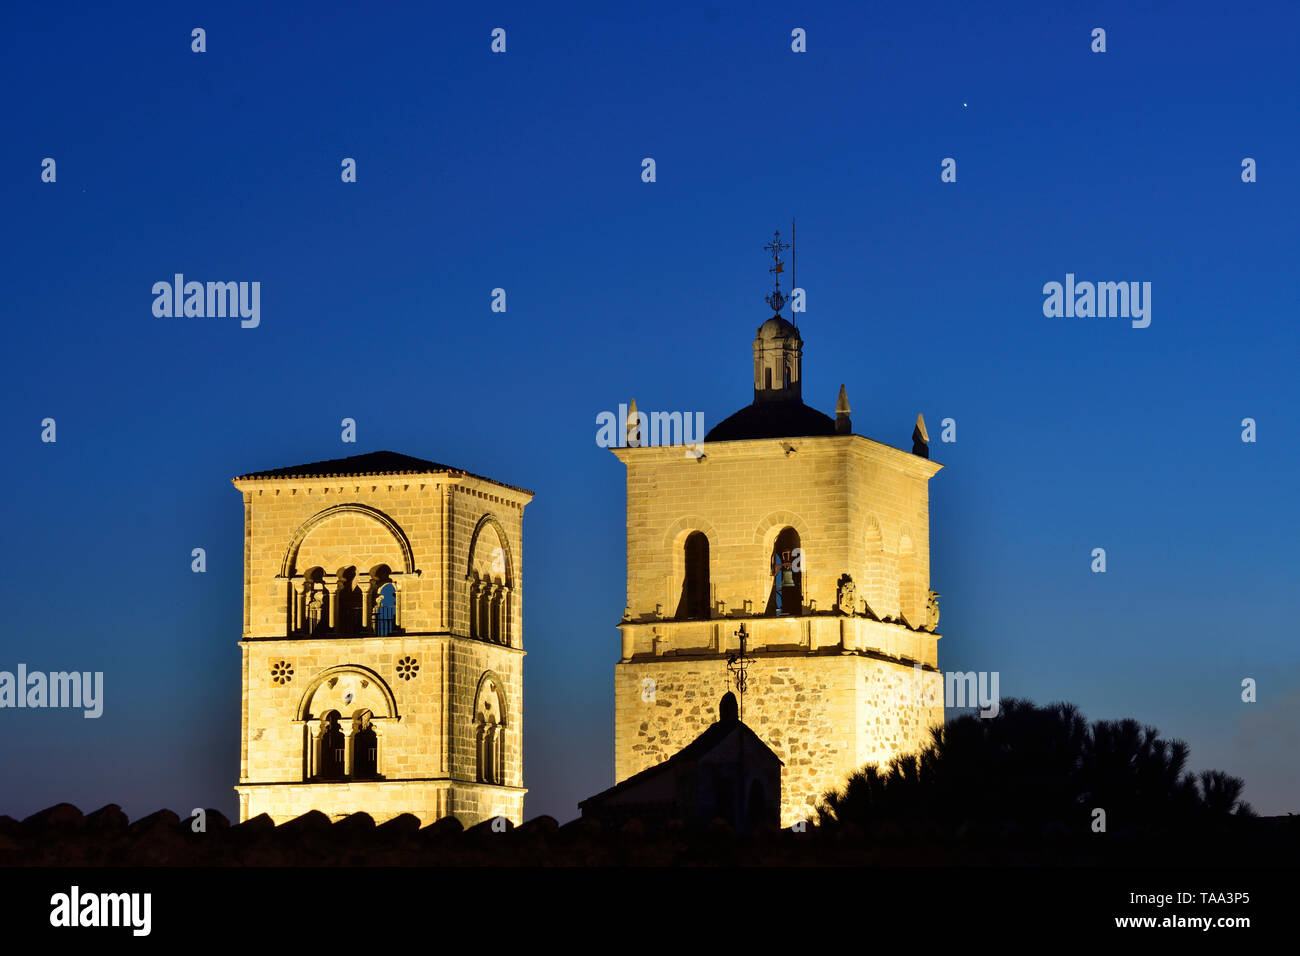 The Church of Santa Maria la Mayor with its two towers, dating back to the 15th century. Trujillo, Spain Stock Photo